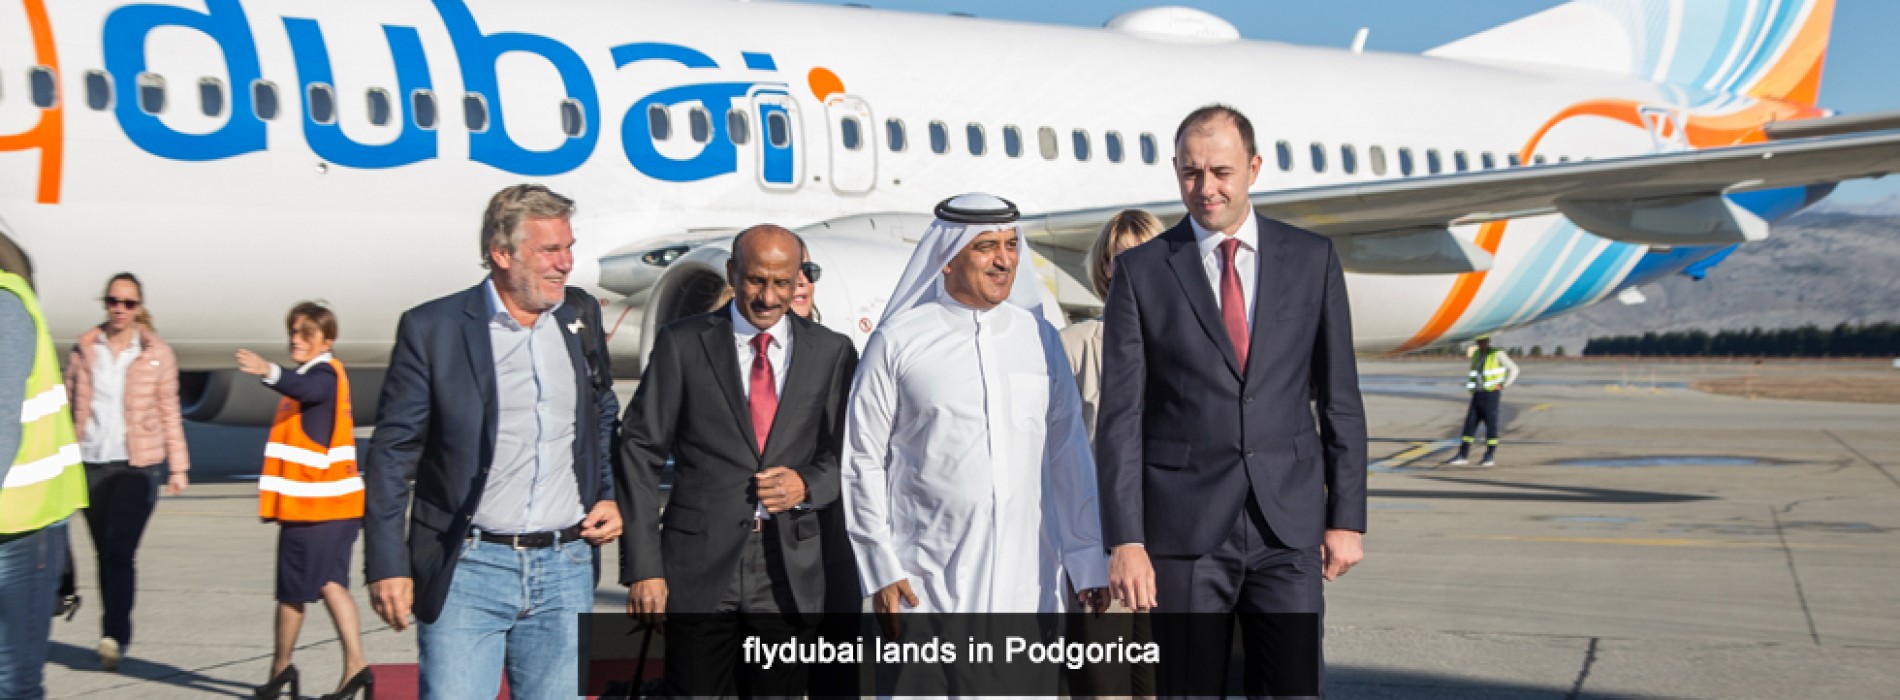 flydubai the first airline from the UAE to operate direct air links to Makhachkala and Voronezh